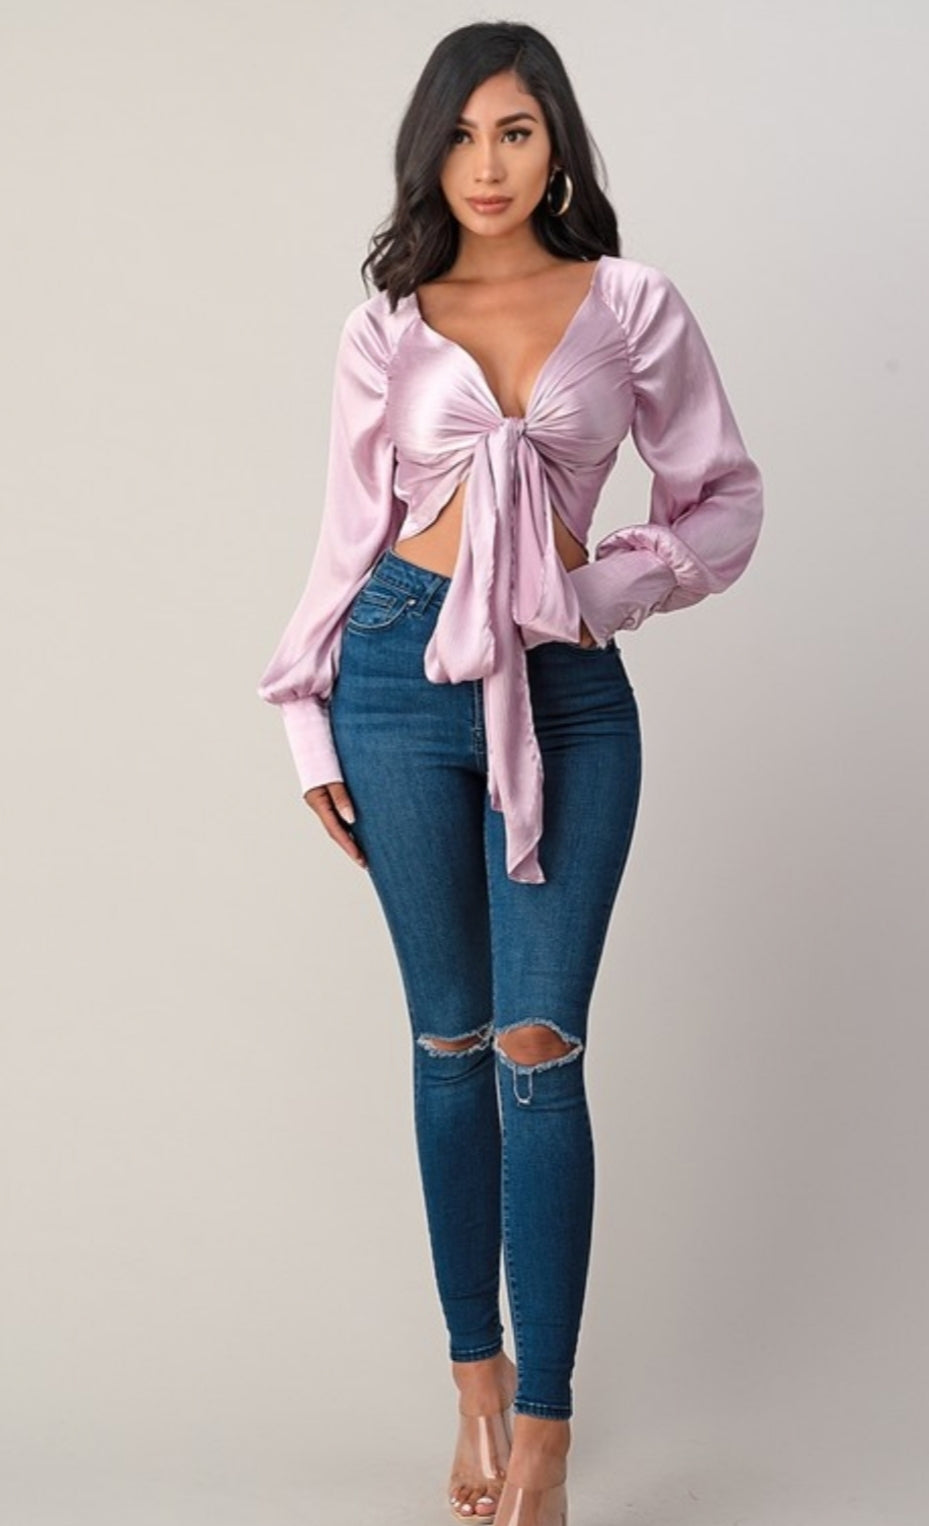 This top and color combination is everything! It has the perfect colors for a transition into this season. This crop top features a classic collar neckline, wisteria satin material, tie front, and plunge neckline. Whether you pair with jeans, leather pants or shorts; this top is definitely a hit! 